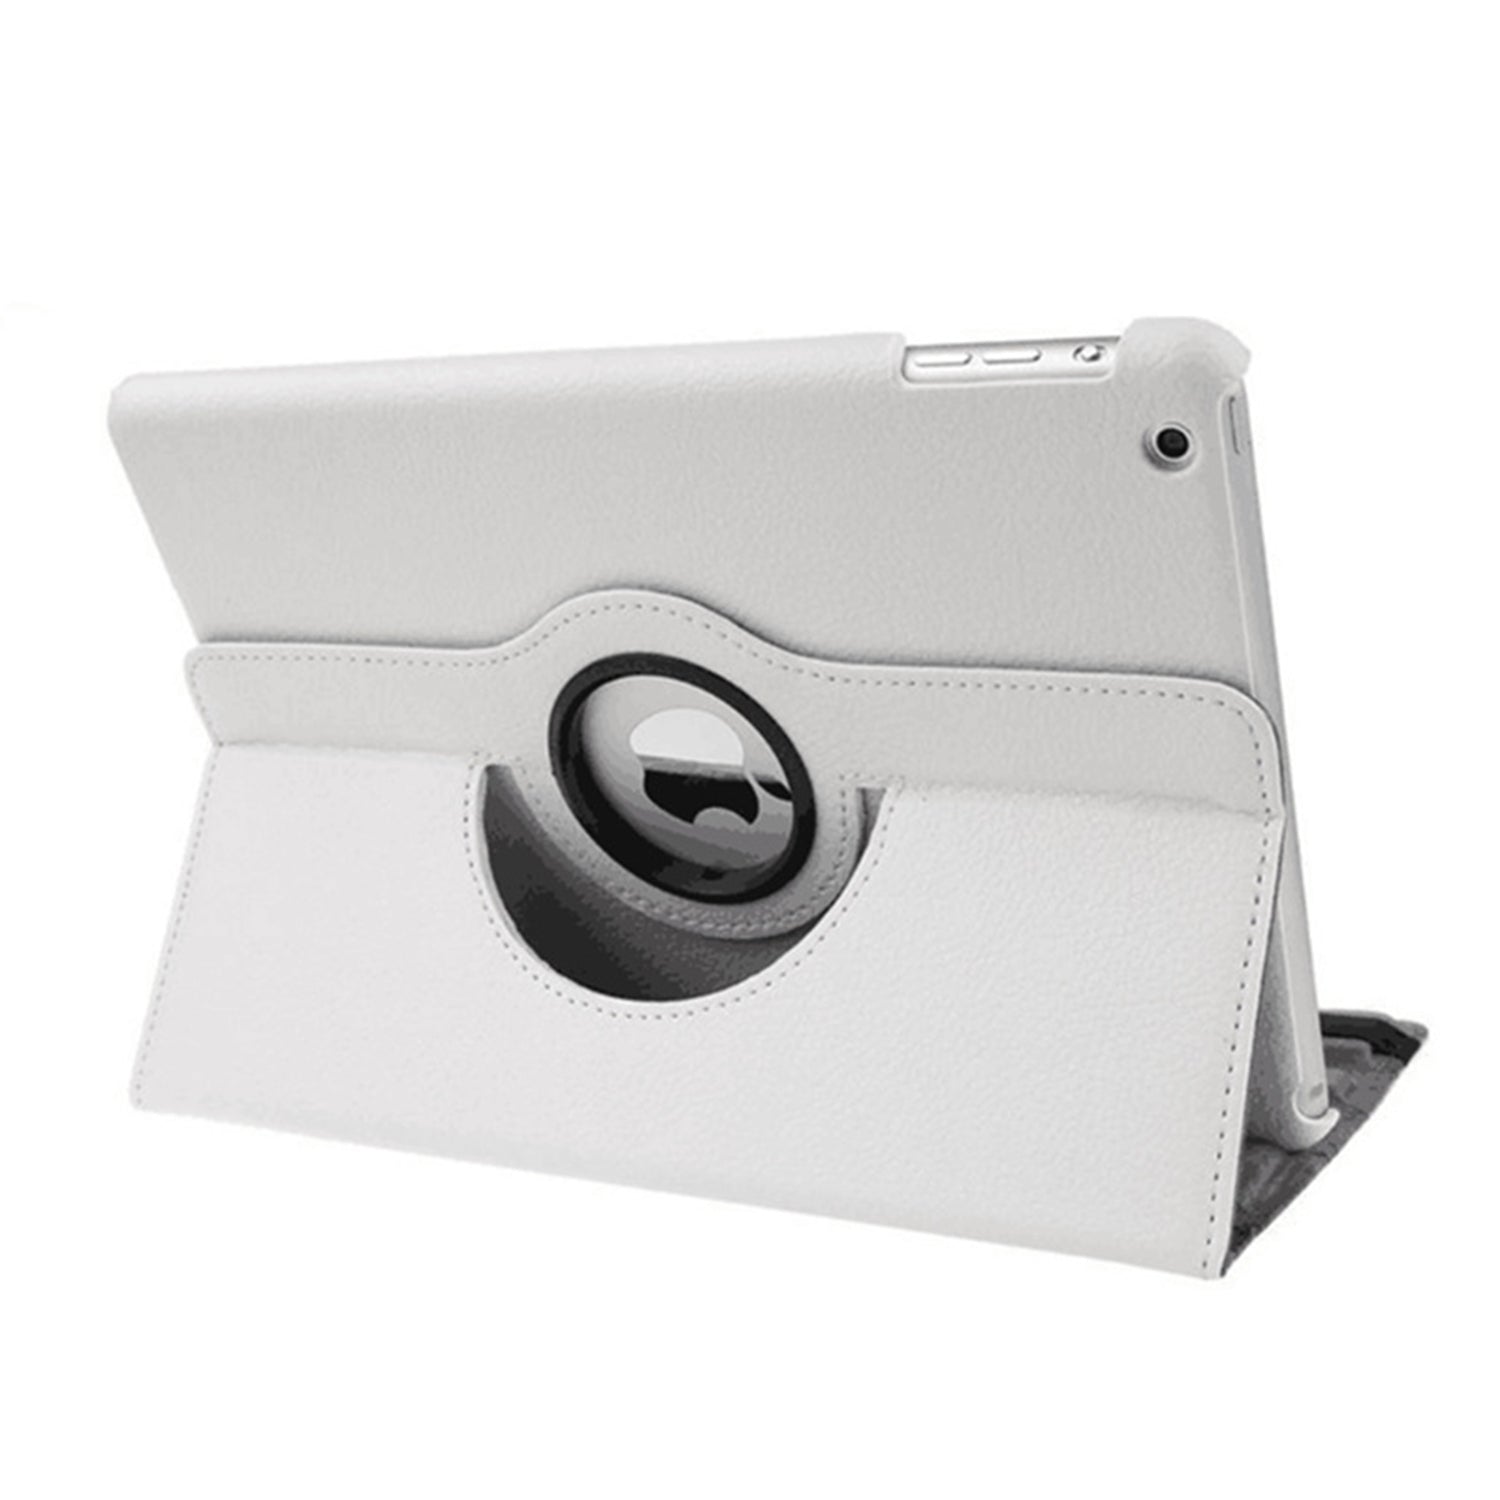 360 Degrees Rotating Standing Case for iPad Pro 9.7"/Air 2&1